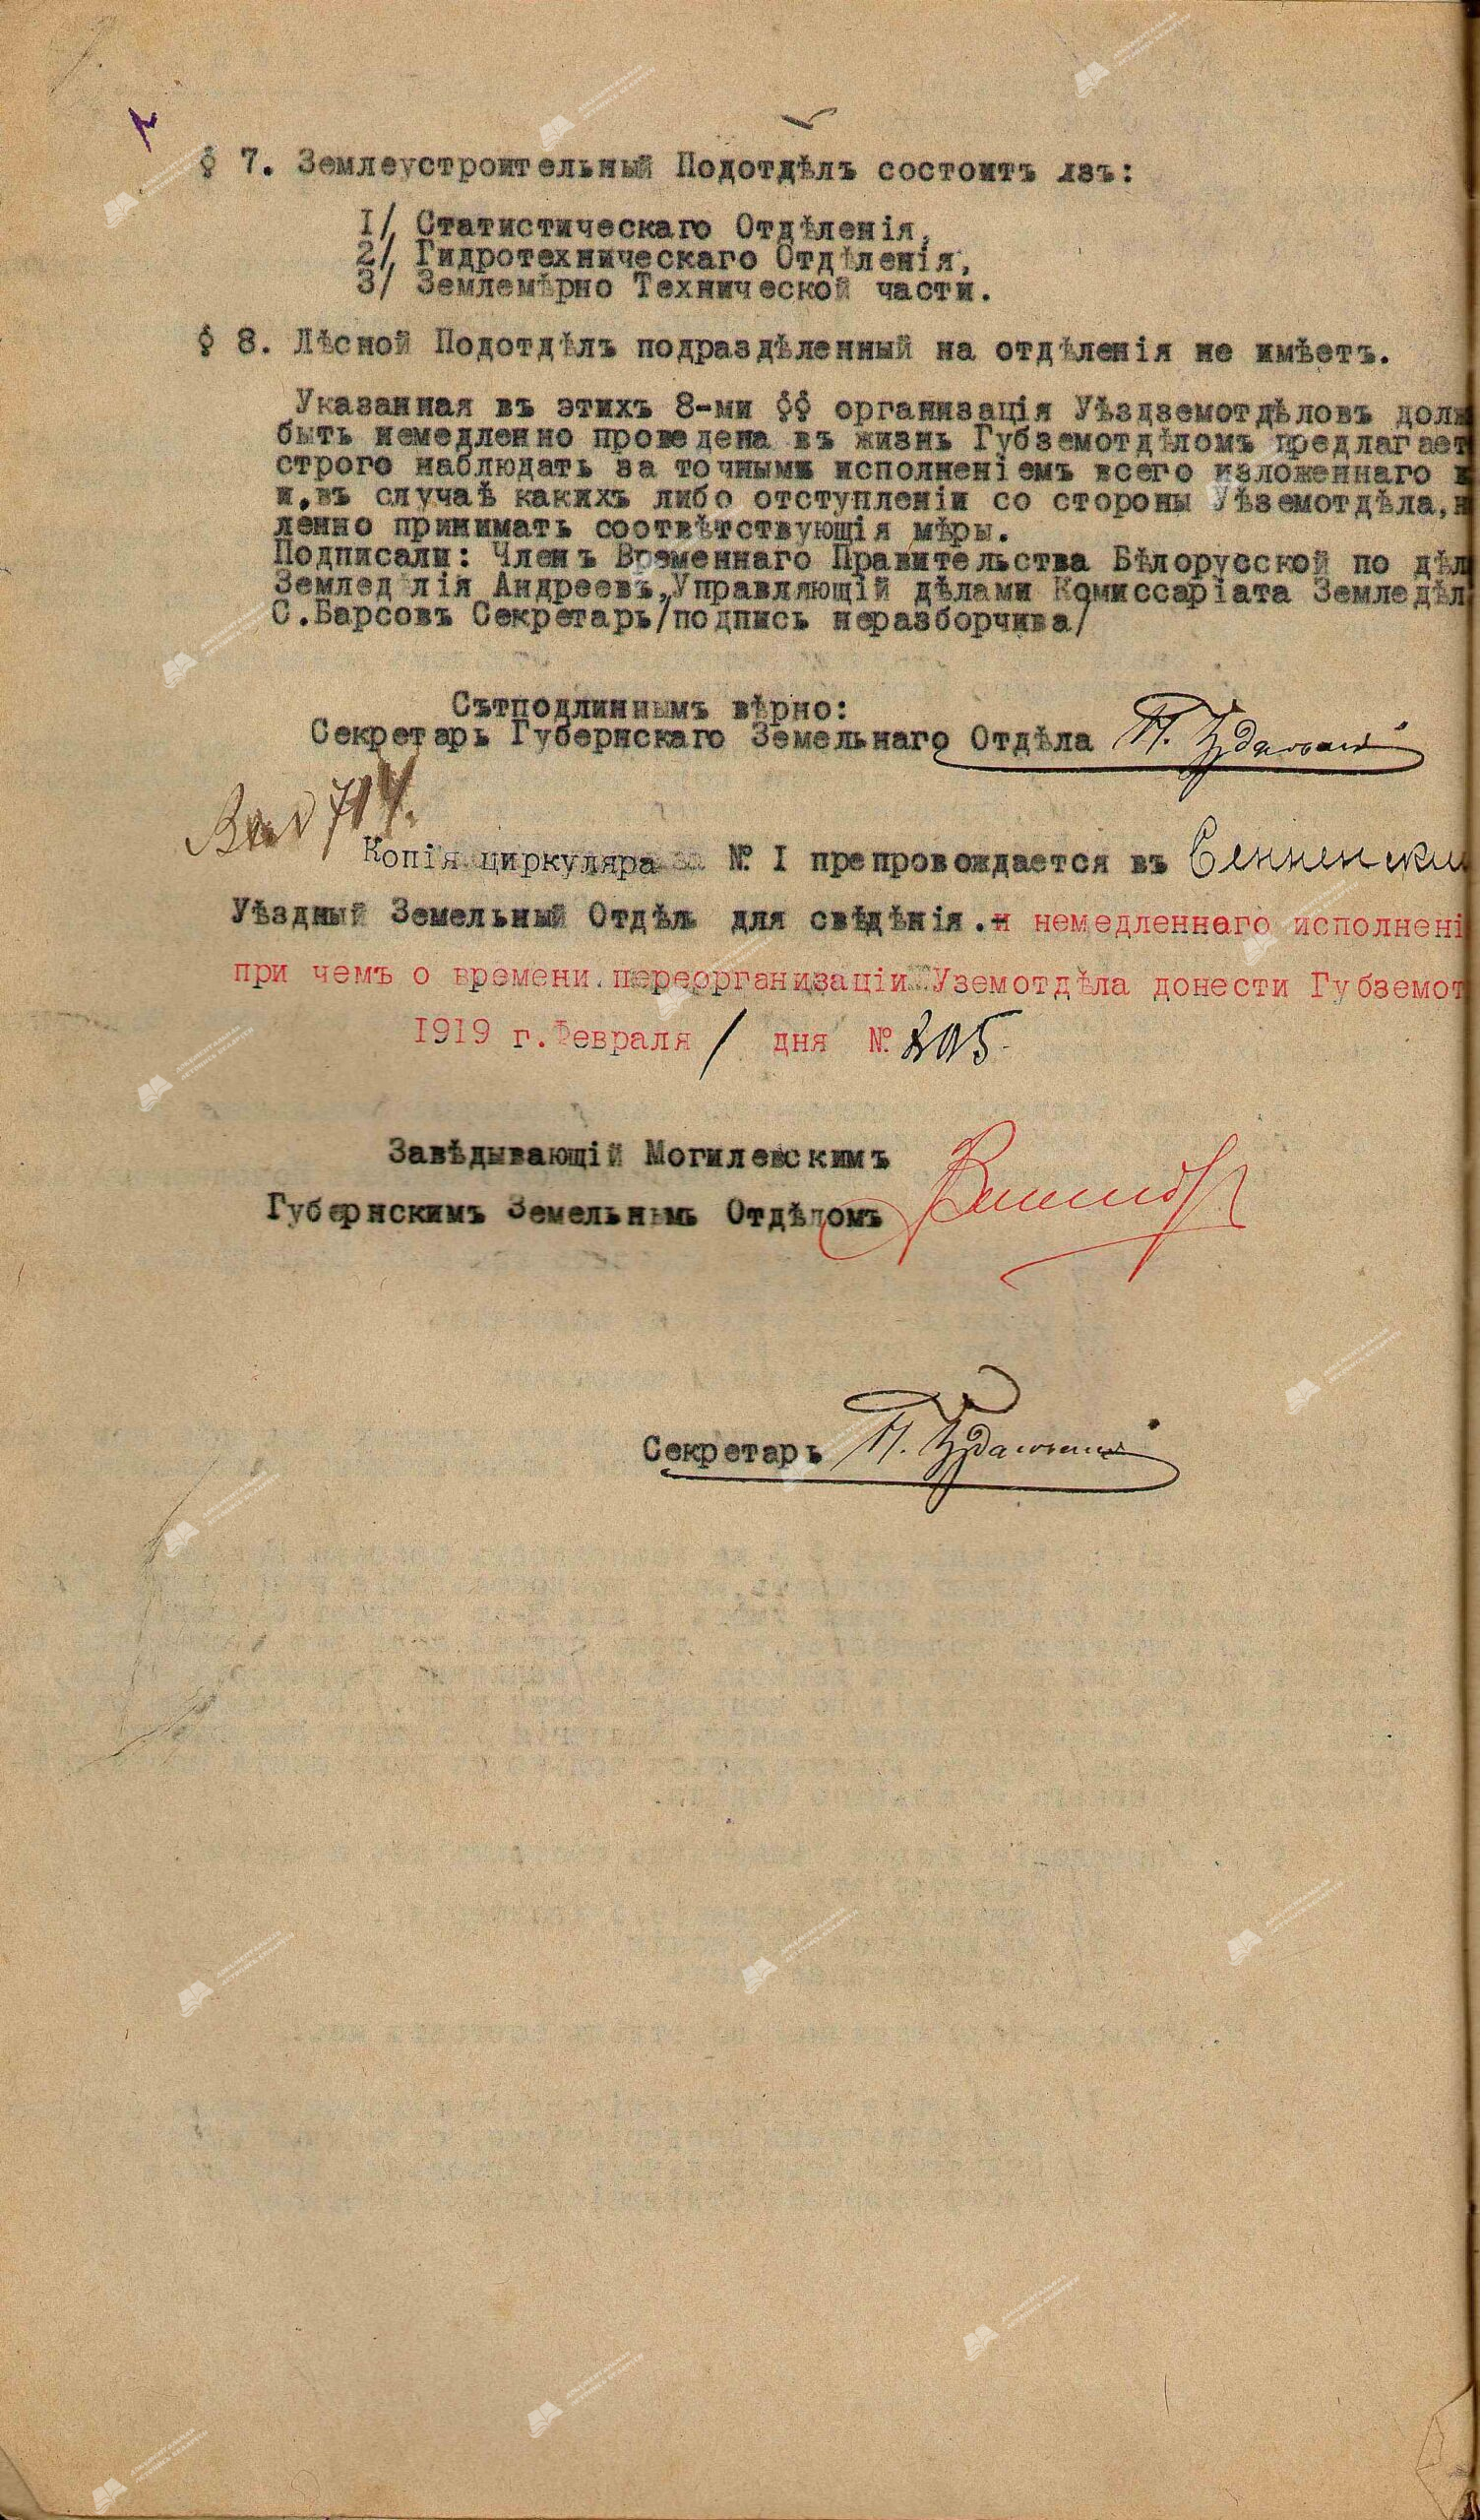 Circular No. 1 of the Commissariat of Agriculture of the Provisional Workers’ and Peasants’ Government of Belarus «On the organization of county land departments on the territory of the Belarusian Soviet Socialist Republic and the scheme of the county land department»-с. 1